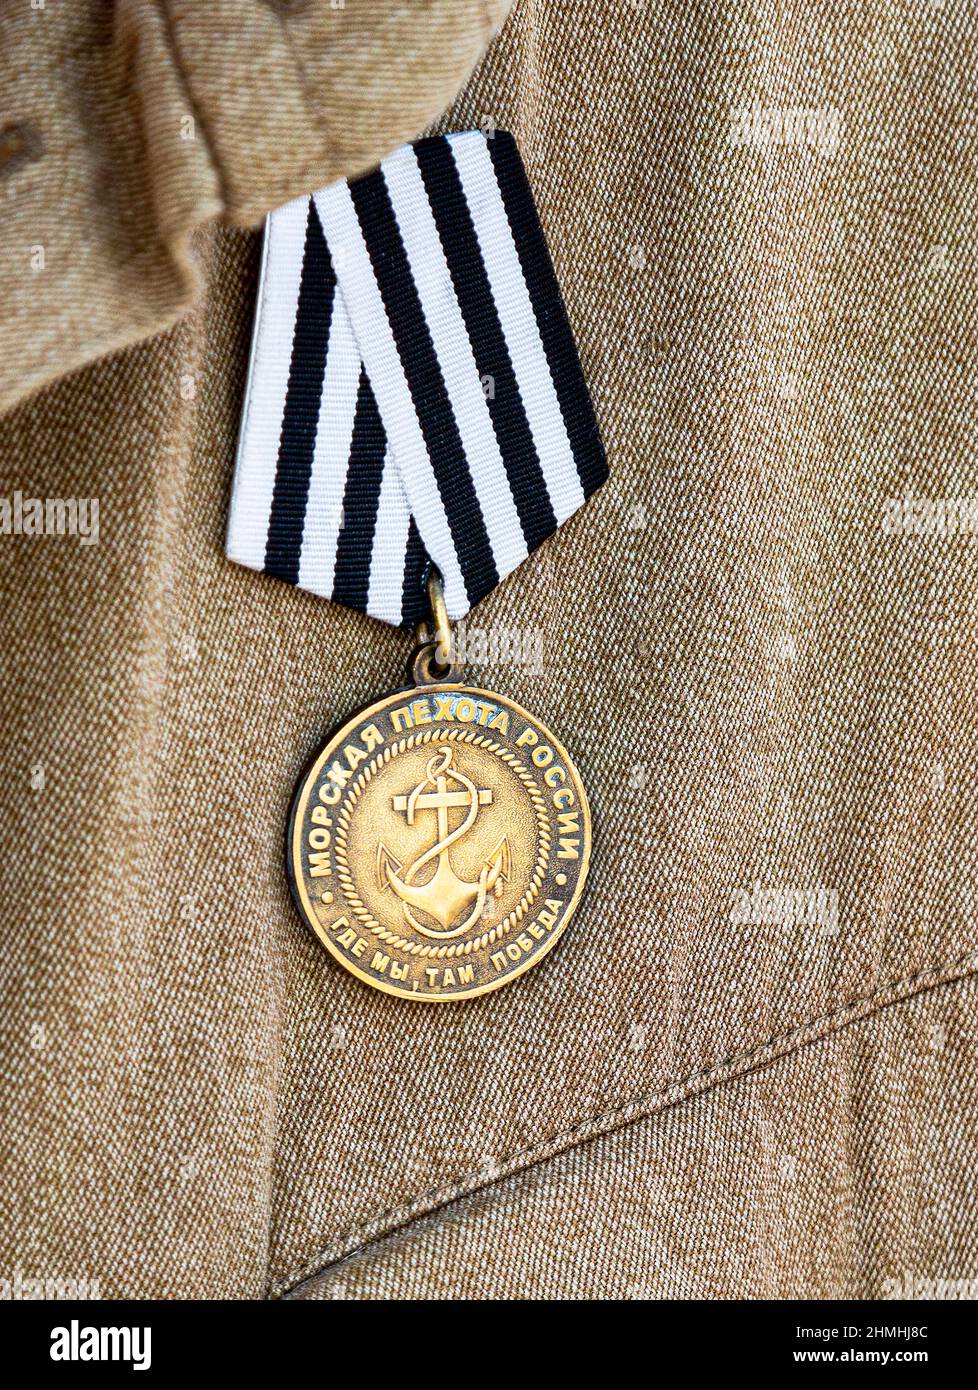 Samara, Russia - April 13, 2019: Commemorative medal of the Marine Corps of Russia on a military uniform. Translate from Russian: Marine Corps of Russ Stock Photo